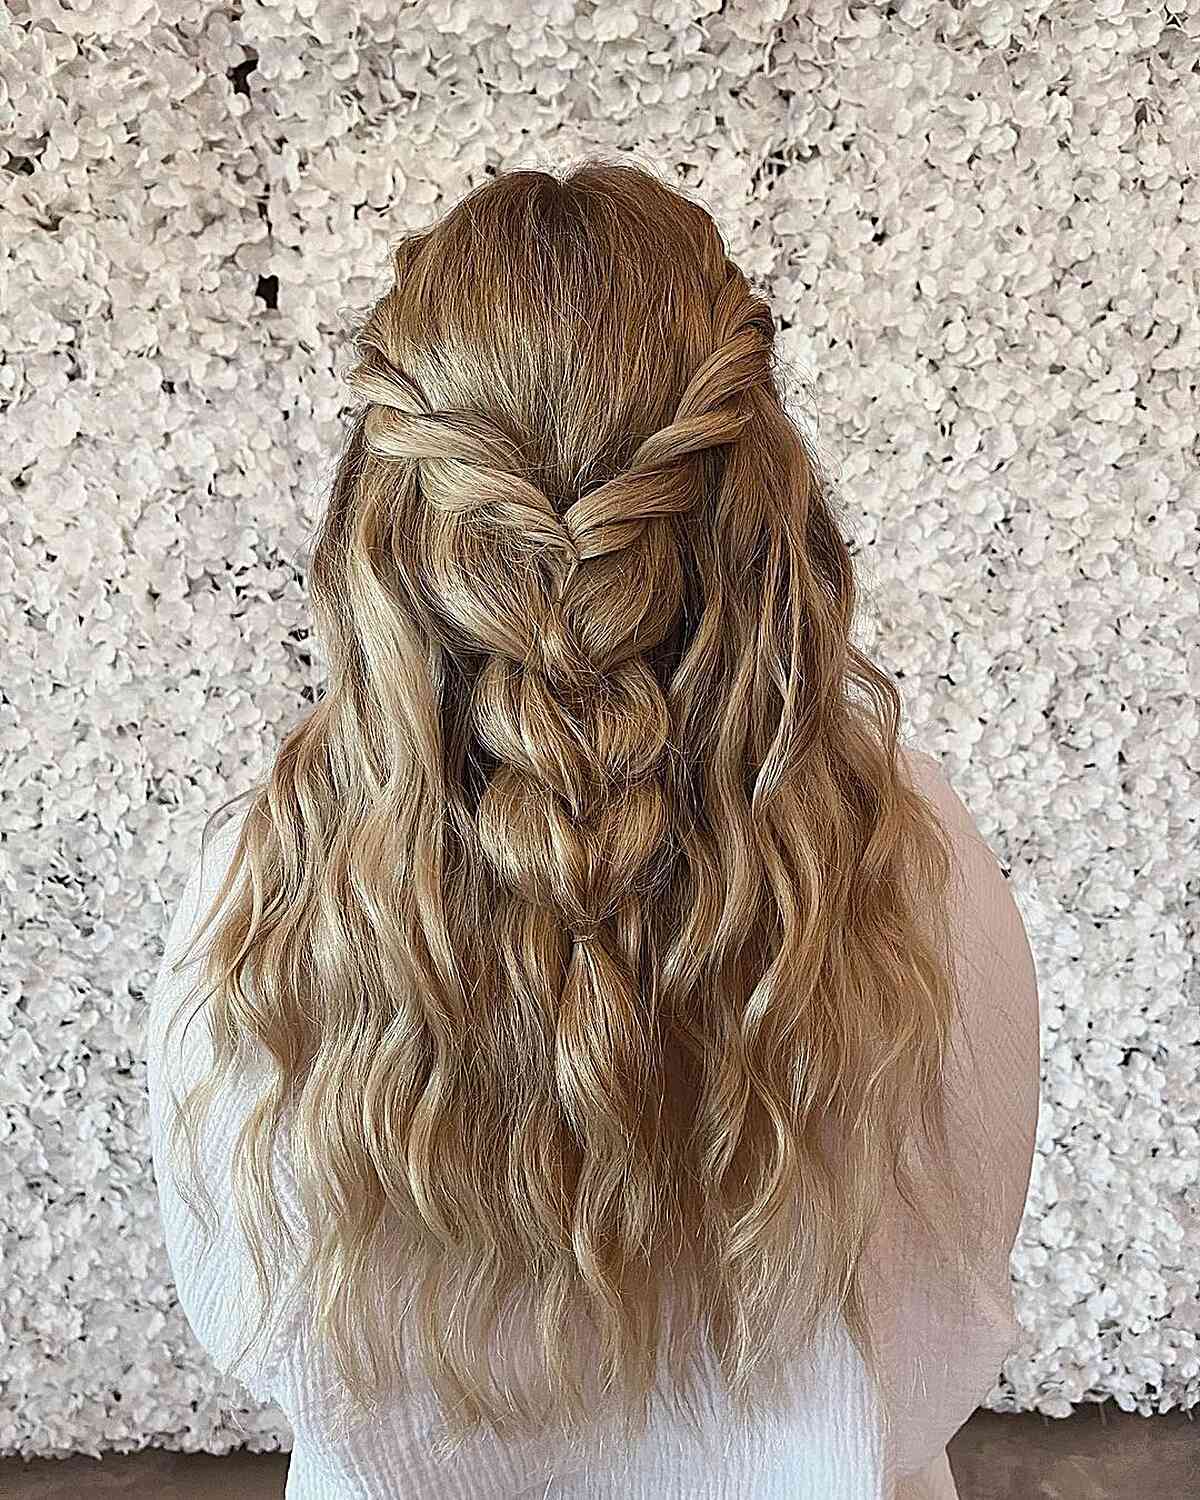 Long Loose Braided Half-Up with Beach Waves for Wedding Attendees